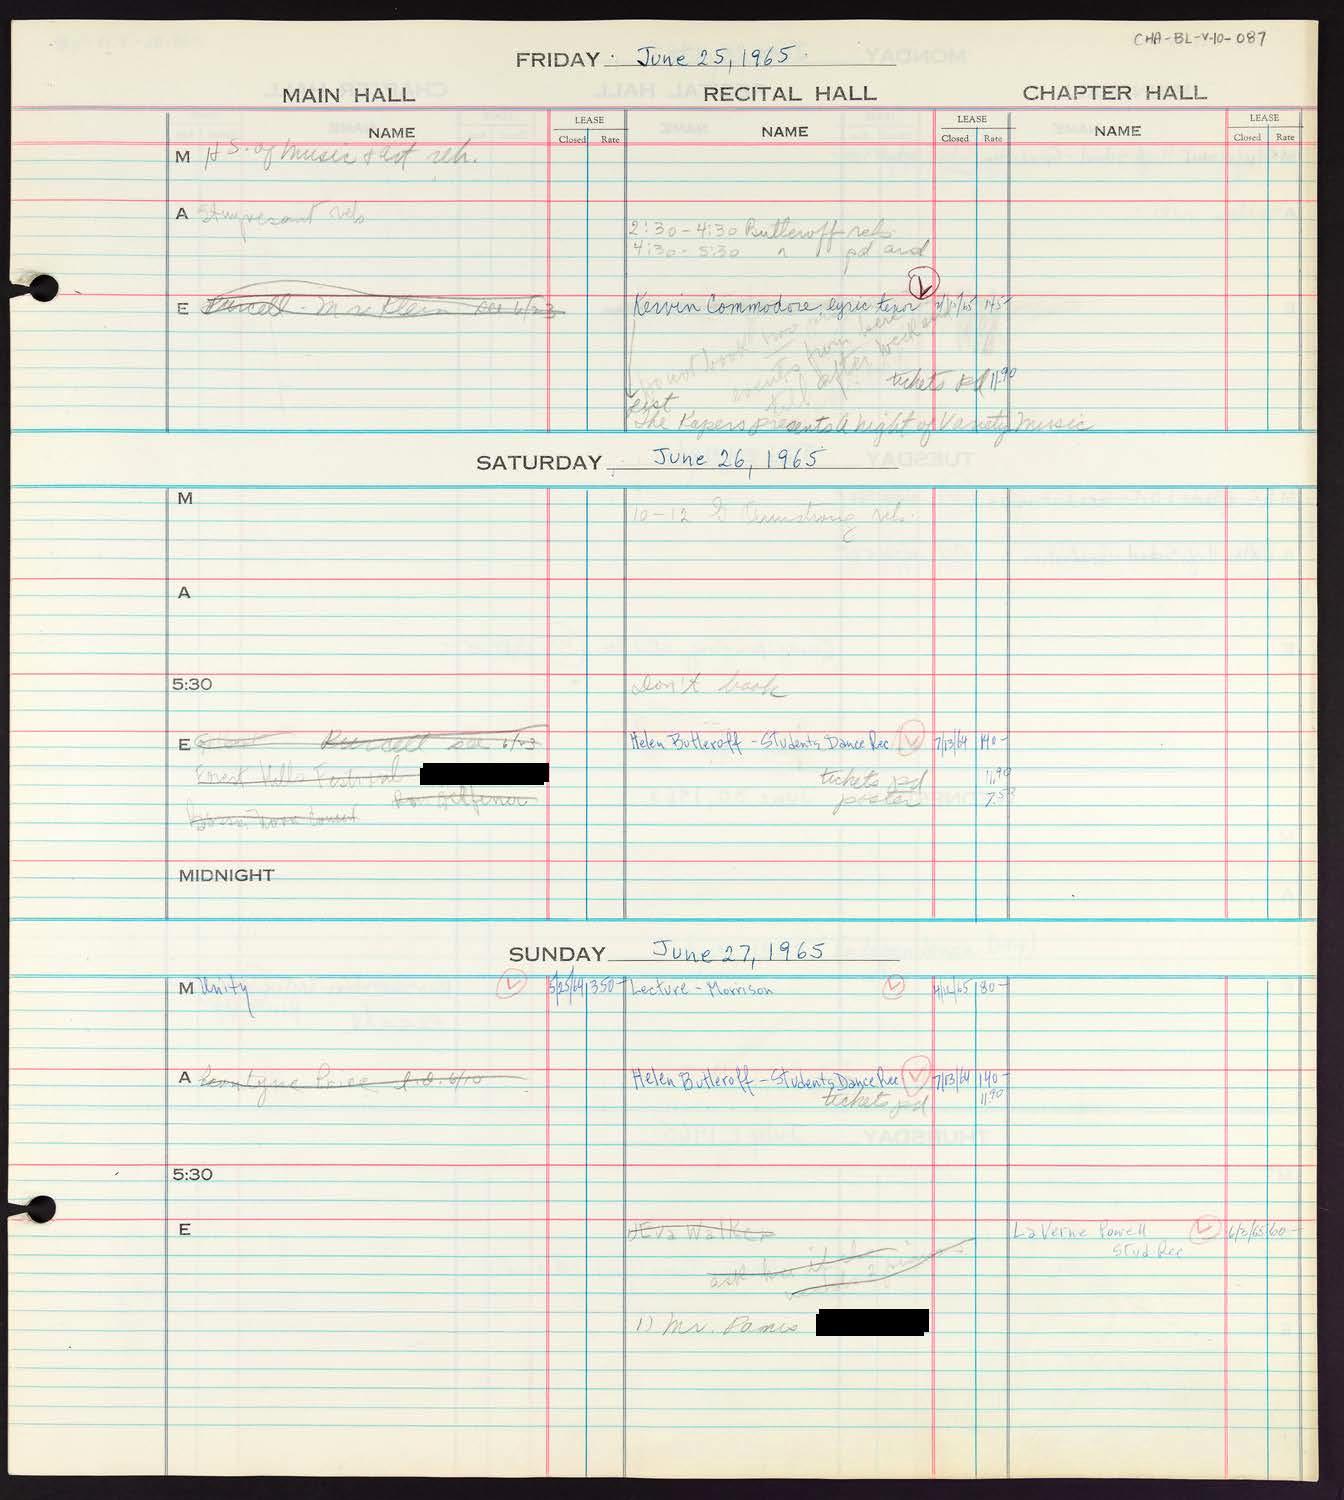 Carnegie Hall Booking Ledger, volume 10, page 87